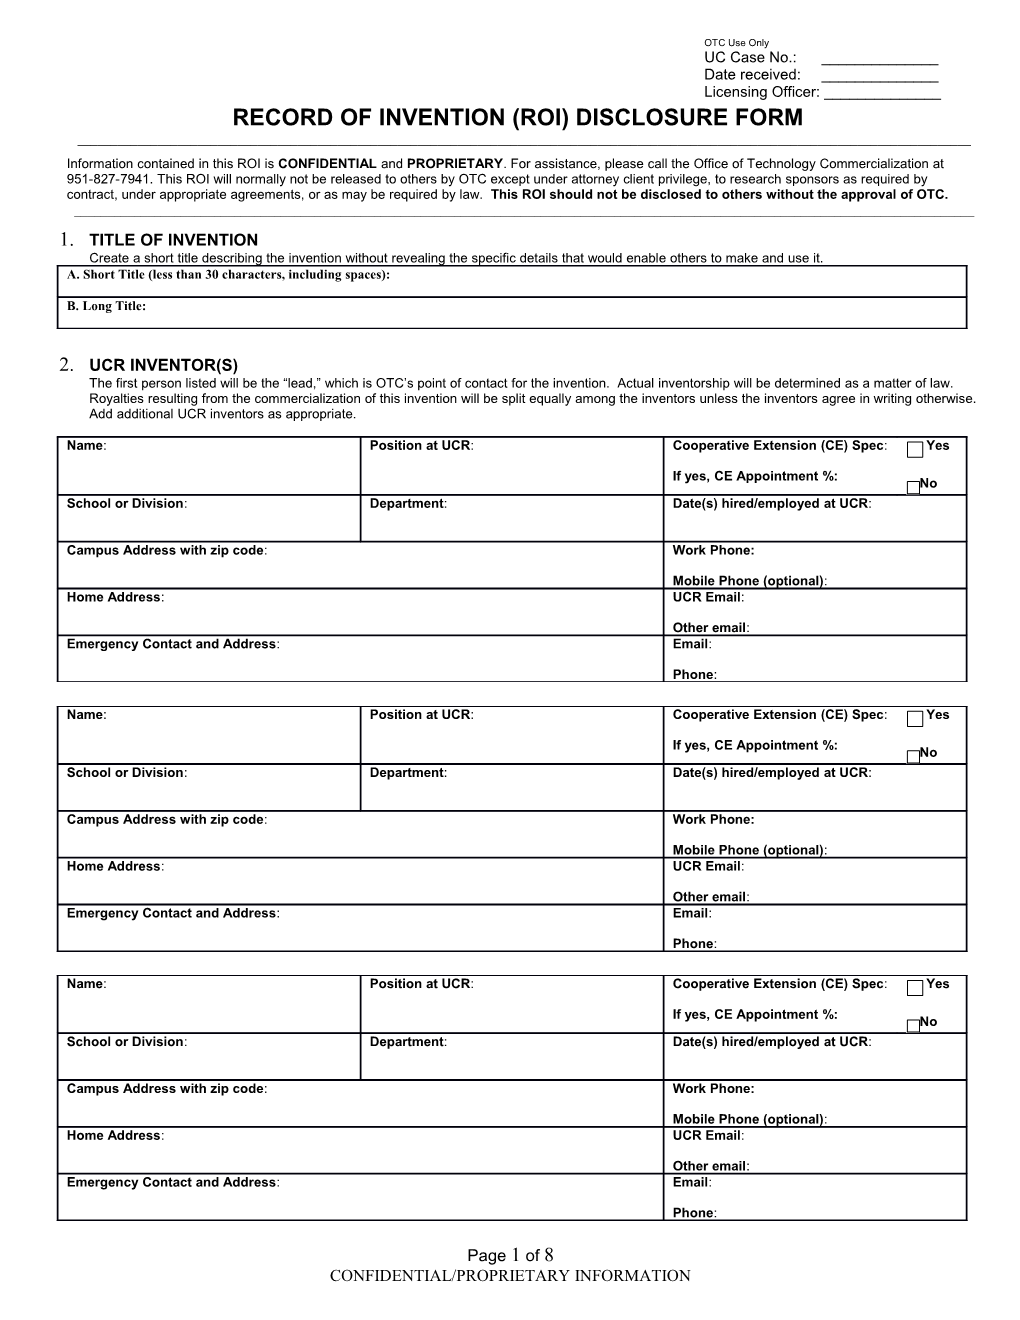 Record of Invention (Roi) Disclosure Form